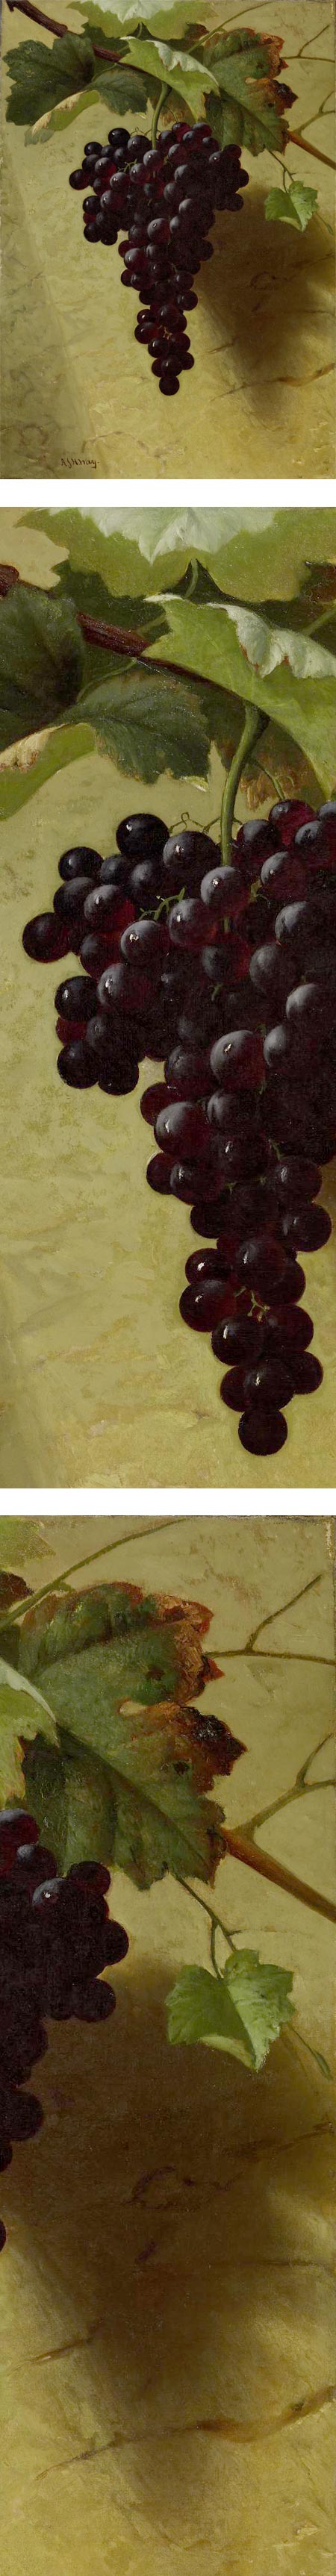 Bunch of Grapes, Andrew Way still life painting